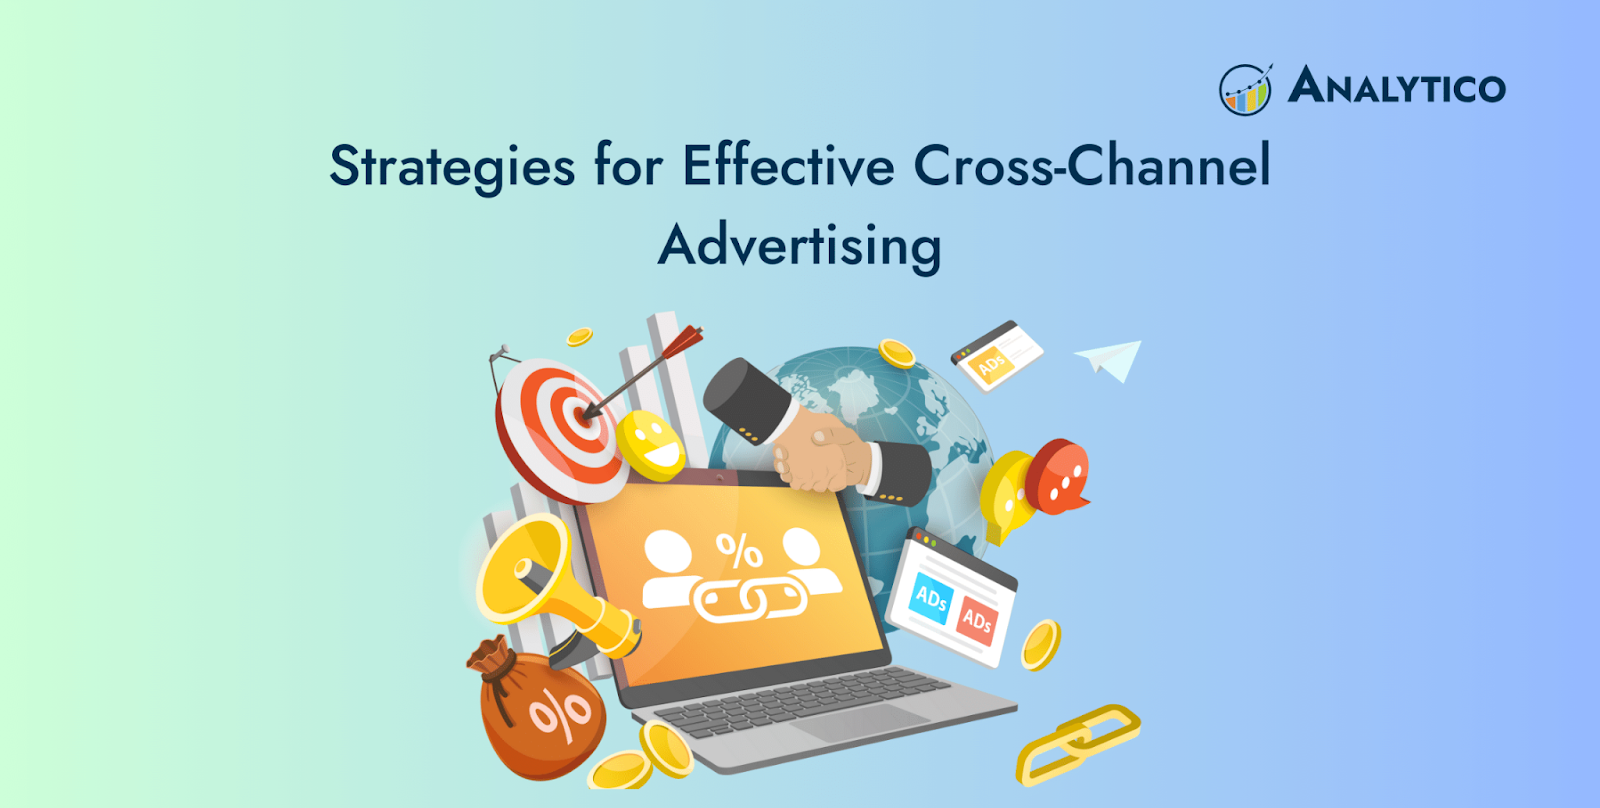 Strategies for Effective Cross-Channel Advertising: